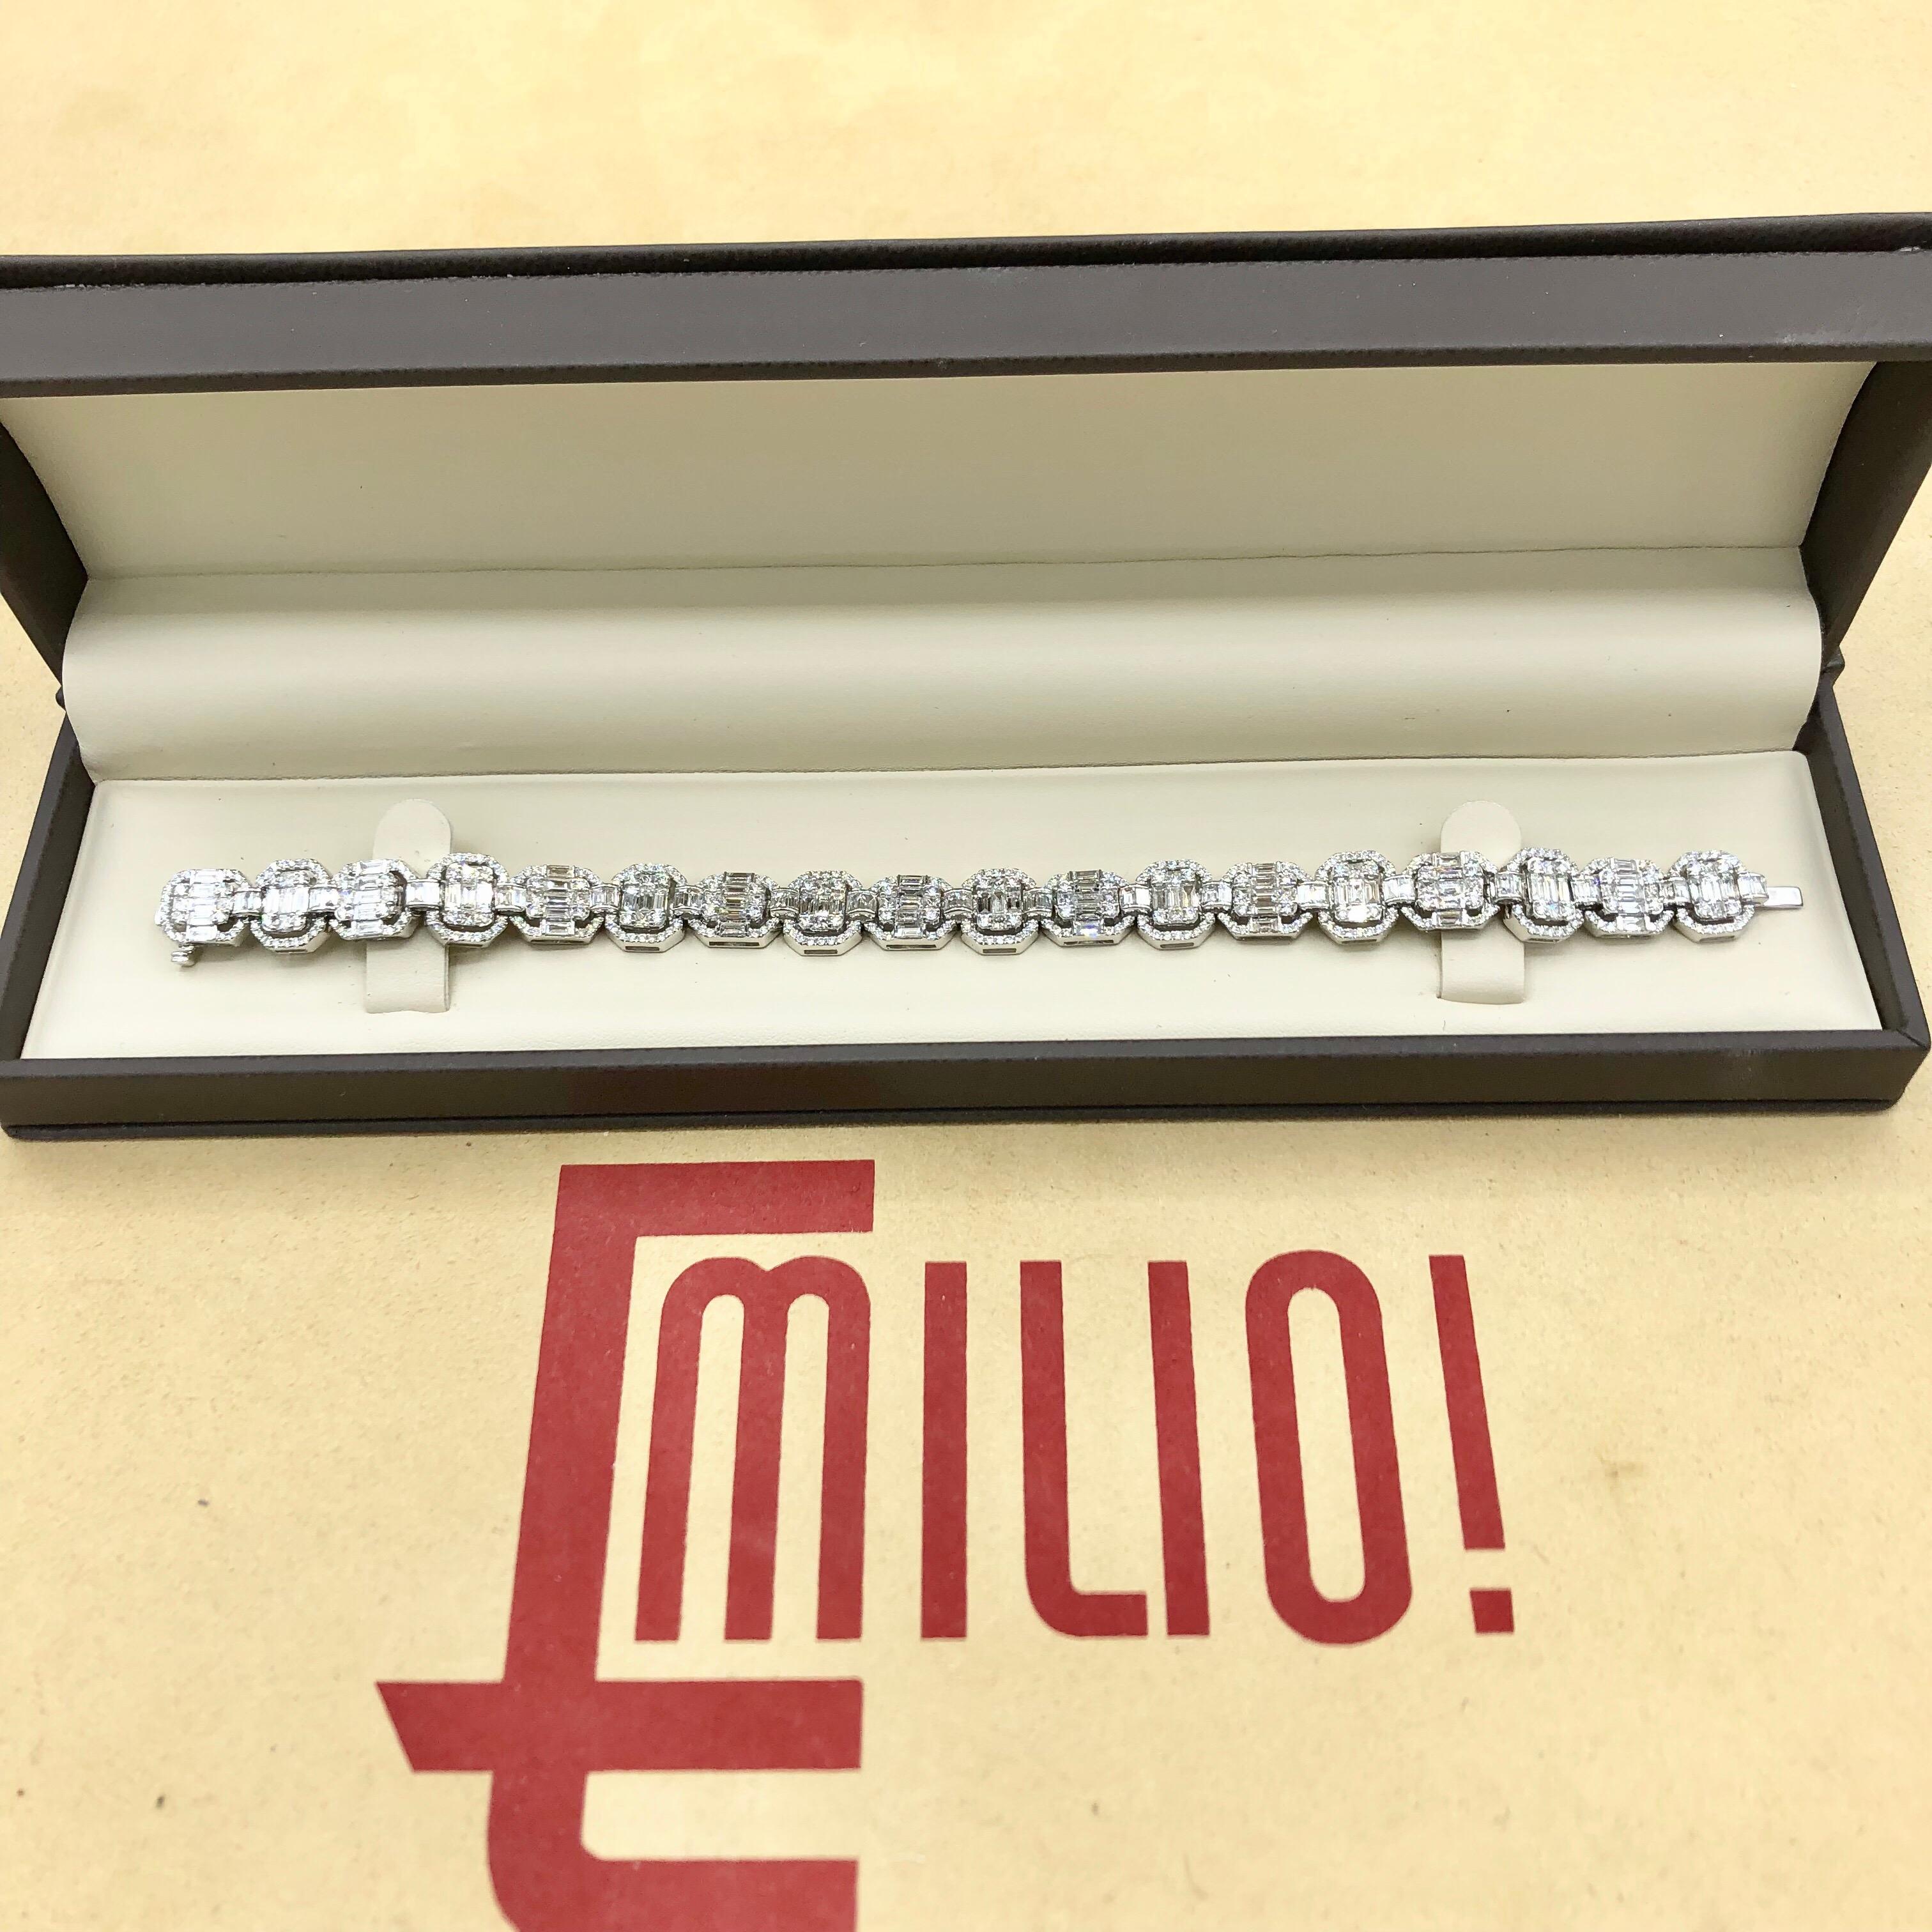 Hand made in the Emilio Jewelry Factory. Here are the details
Metal: 18k
Natural Diamonds: 9.49 carats mixed shapes including princess cut, round, and baguette diamonds to create an illusion of large single stones. 
Color/Clarity: E color Vvs1